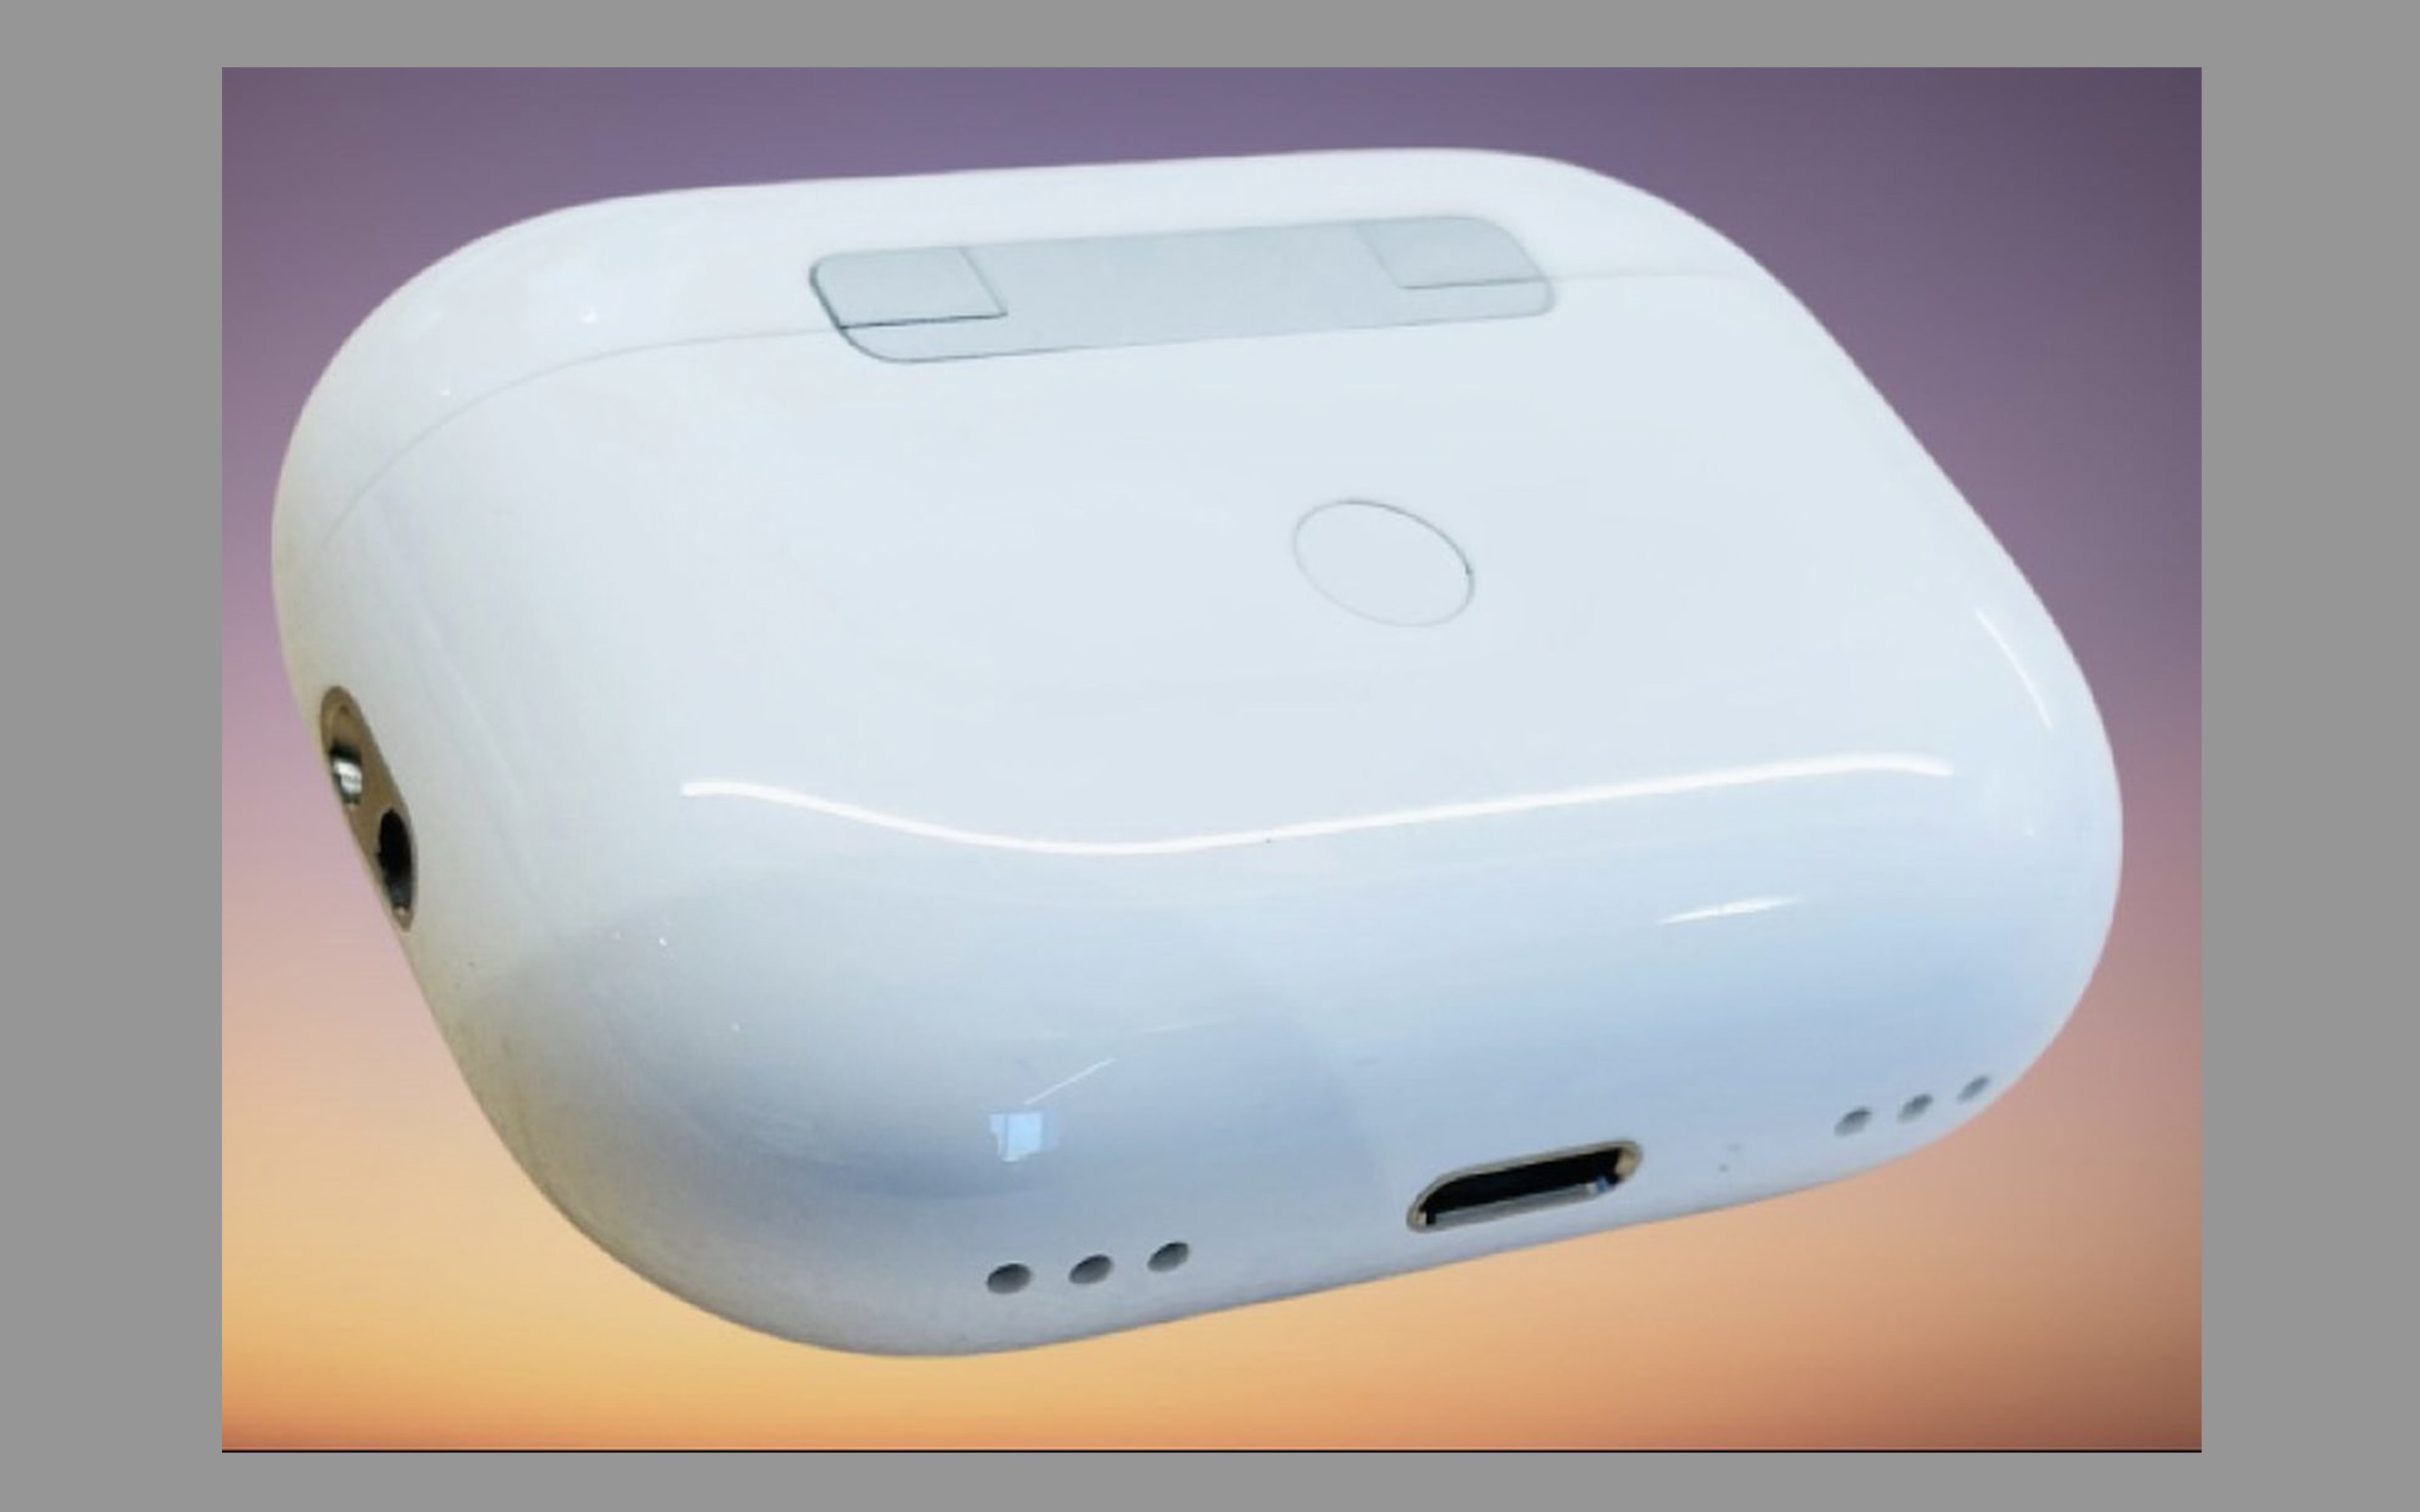 images claim to show upgraded AirPods Pro case with speaker holes for 'Find My' - 9to5Mac